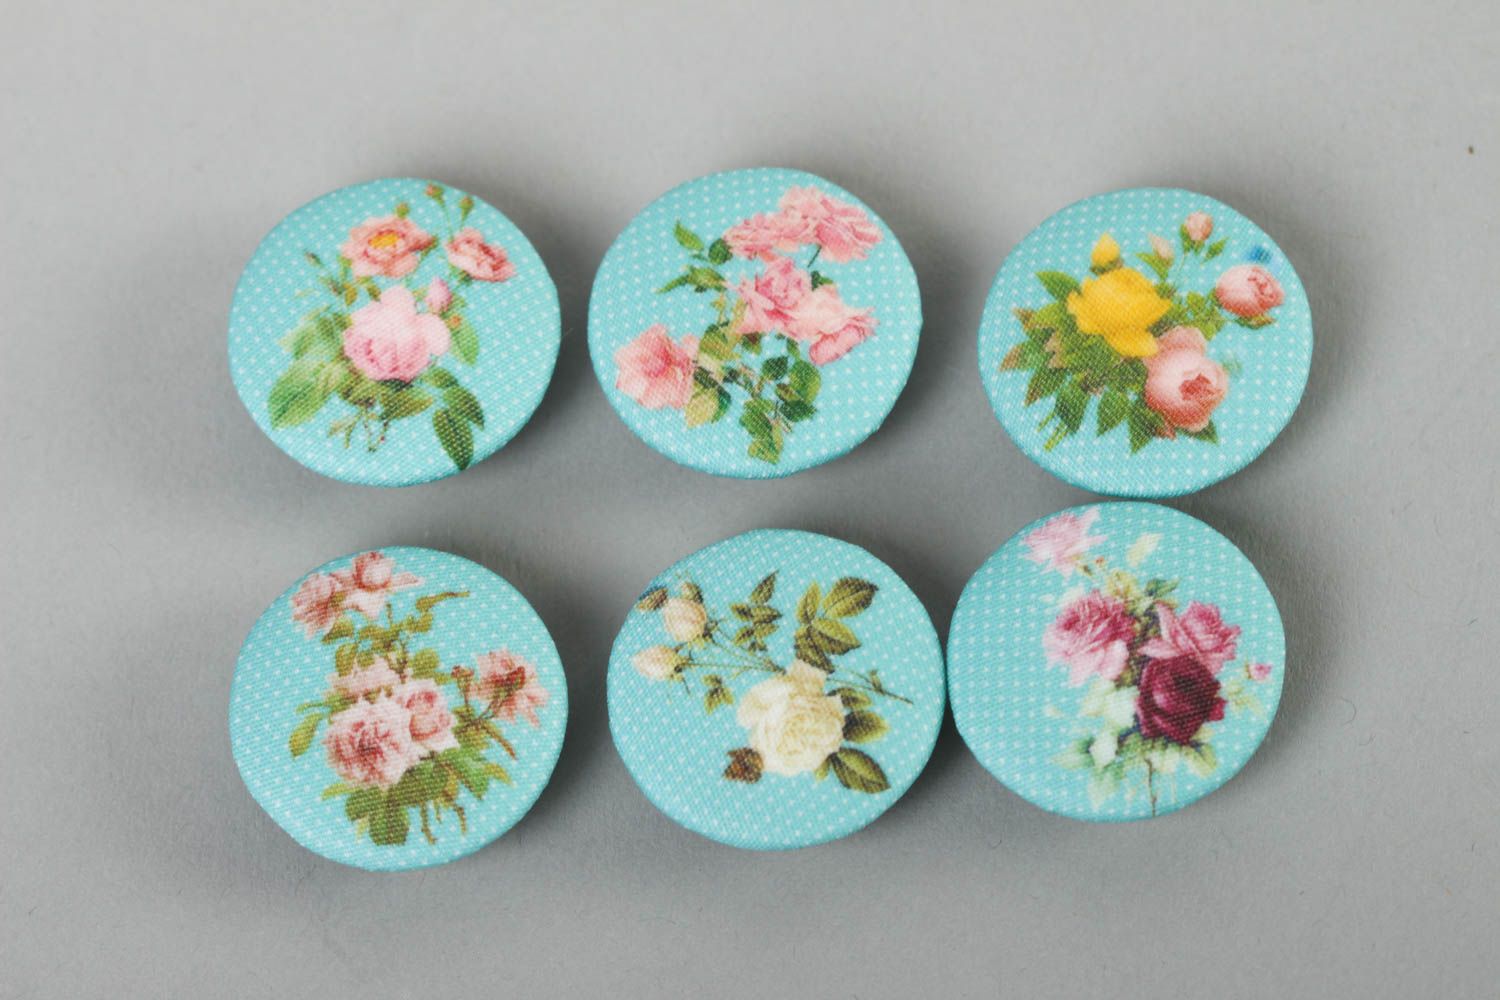 Fittings for clothes 6 handmade buttons needlework supplies sewing accessories photo 2